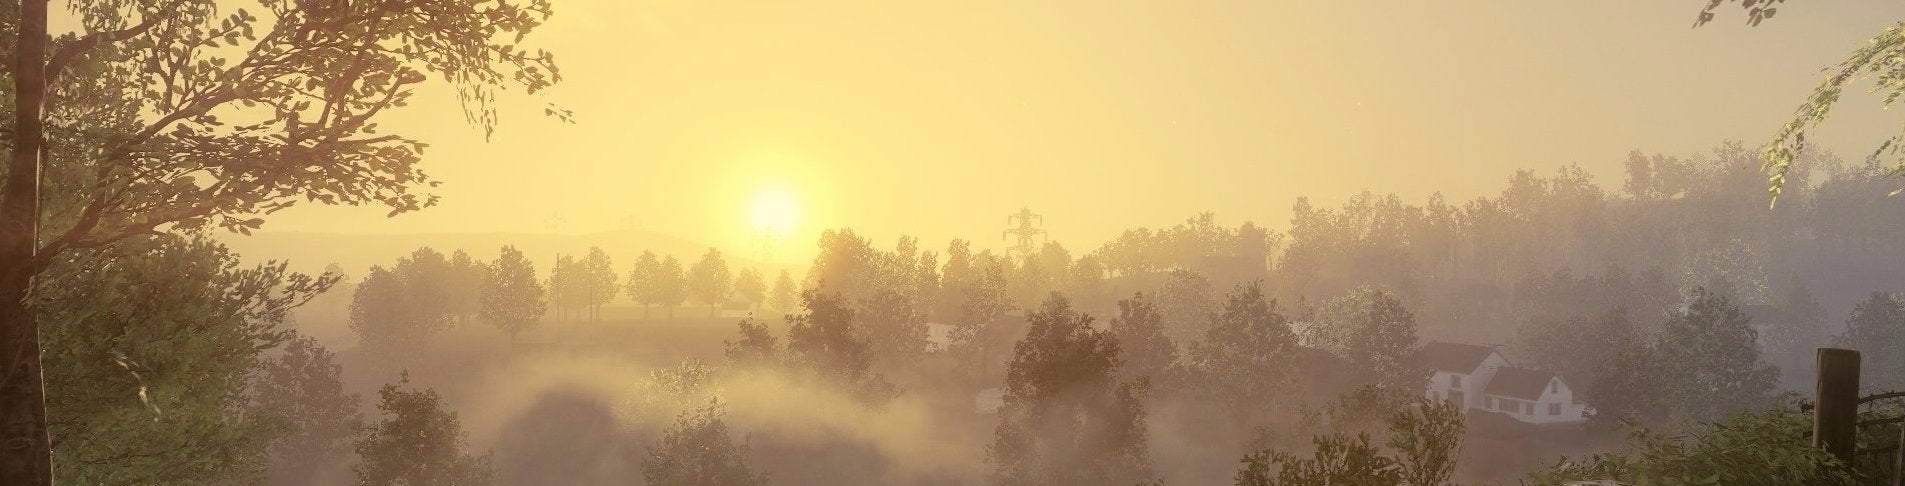 Image for Games of 2015 no. 9: Everybody's Gone to the Rapture